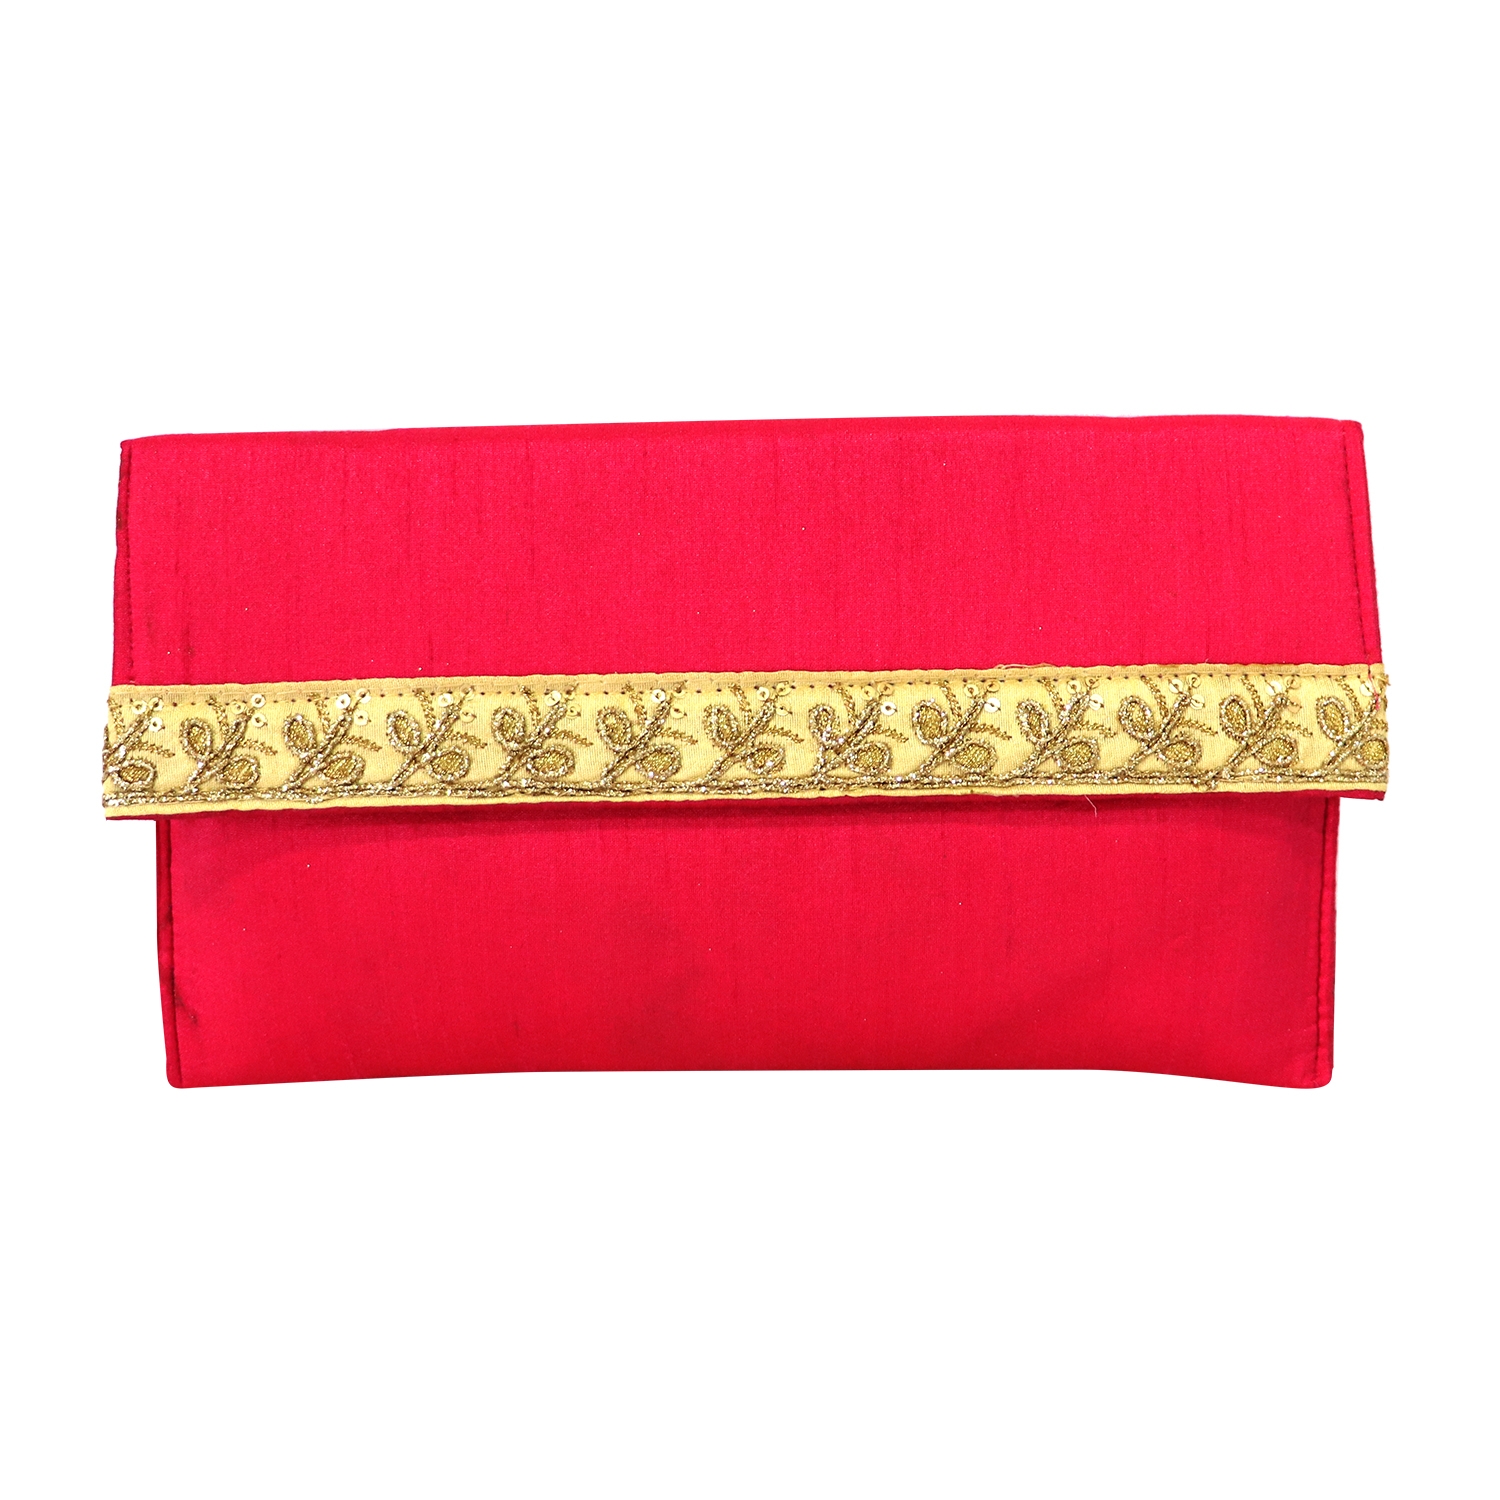 EMM | Lely's Stylish Modern Ethnic Party Clutch With Chain